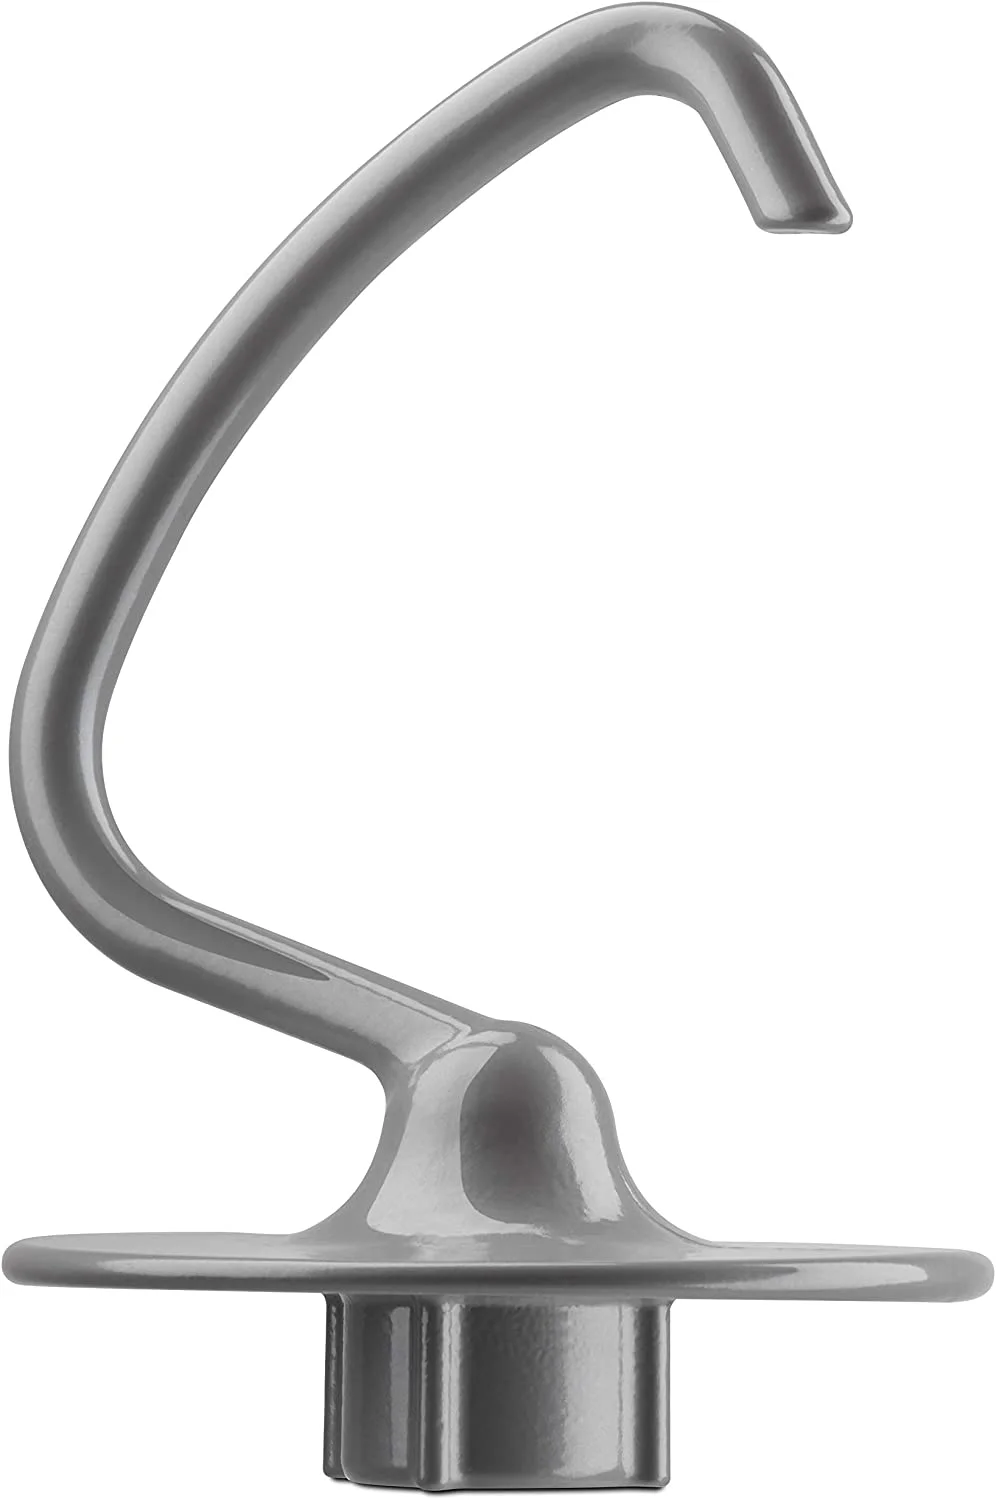 Pastry Beater for KitchenAid Tilt Head Stand Mixers subtle silver